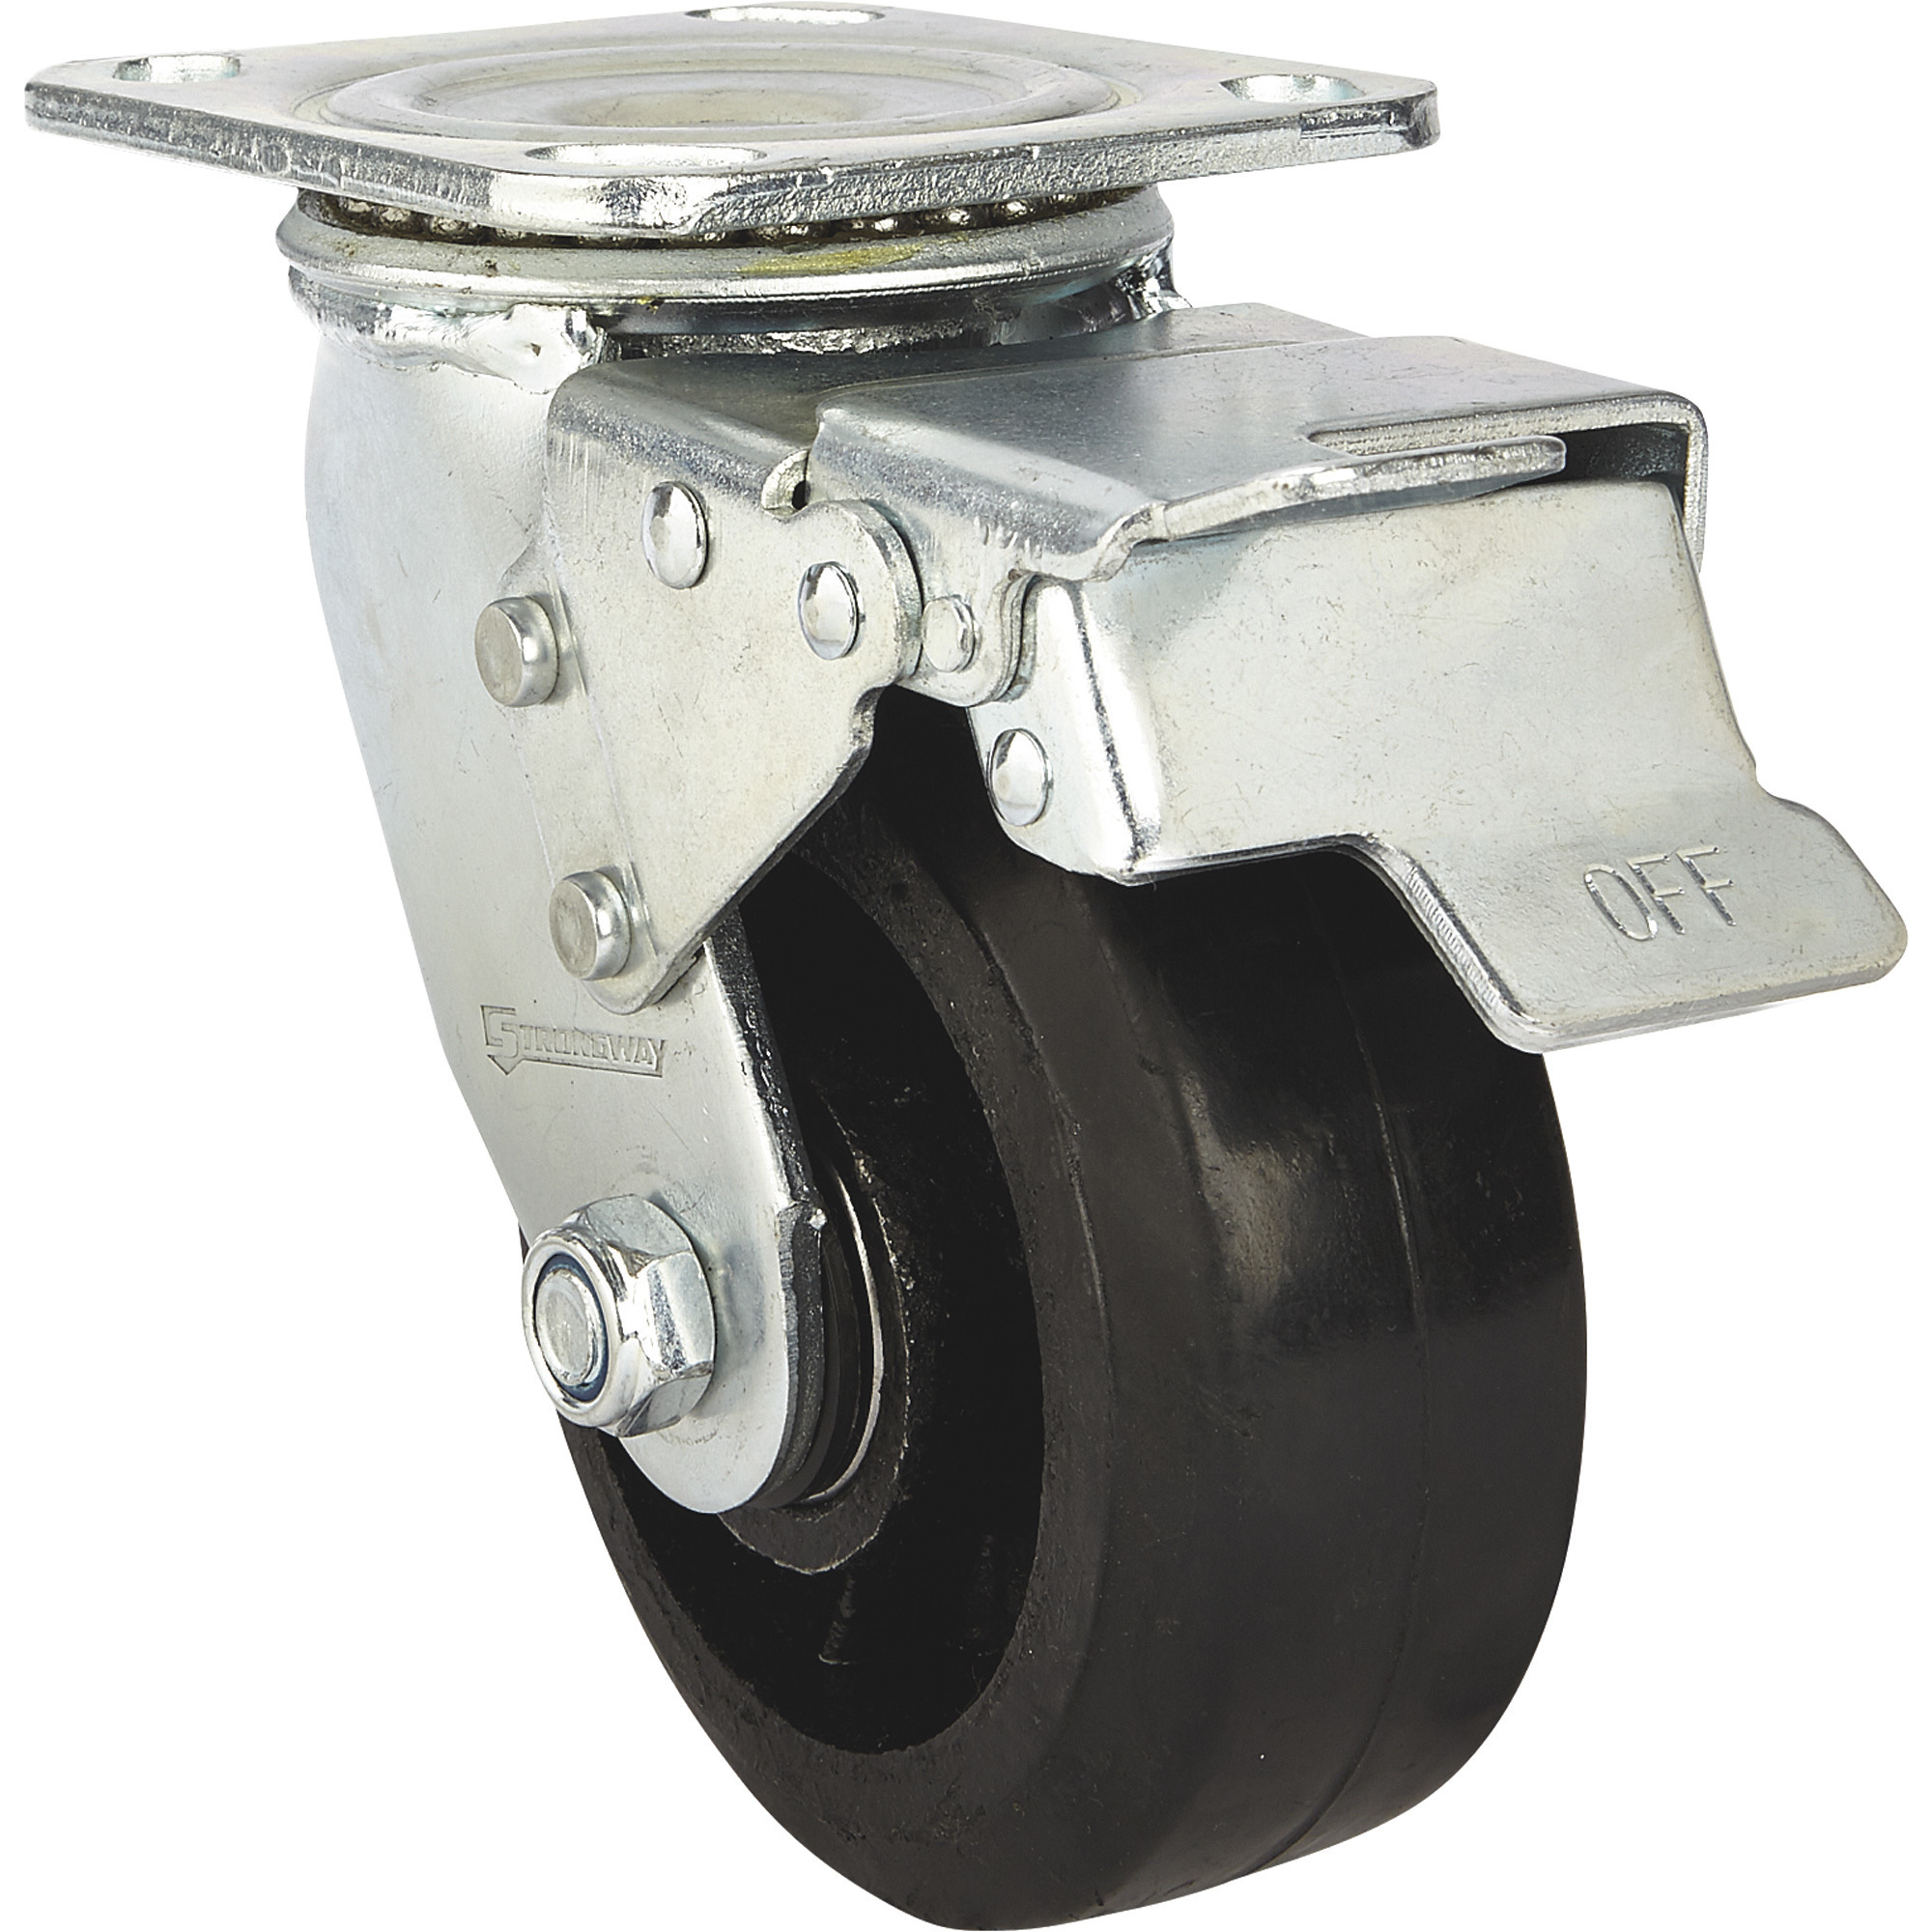 Strongway 5Inch Heavy-Duty Swivel Rubber Caster with Brake, 600-Lb. Capacity